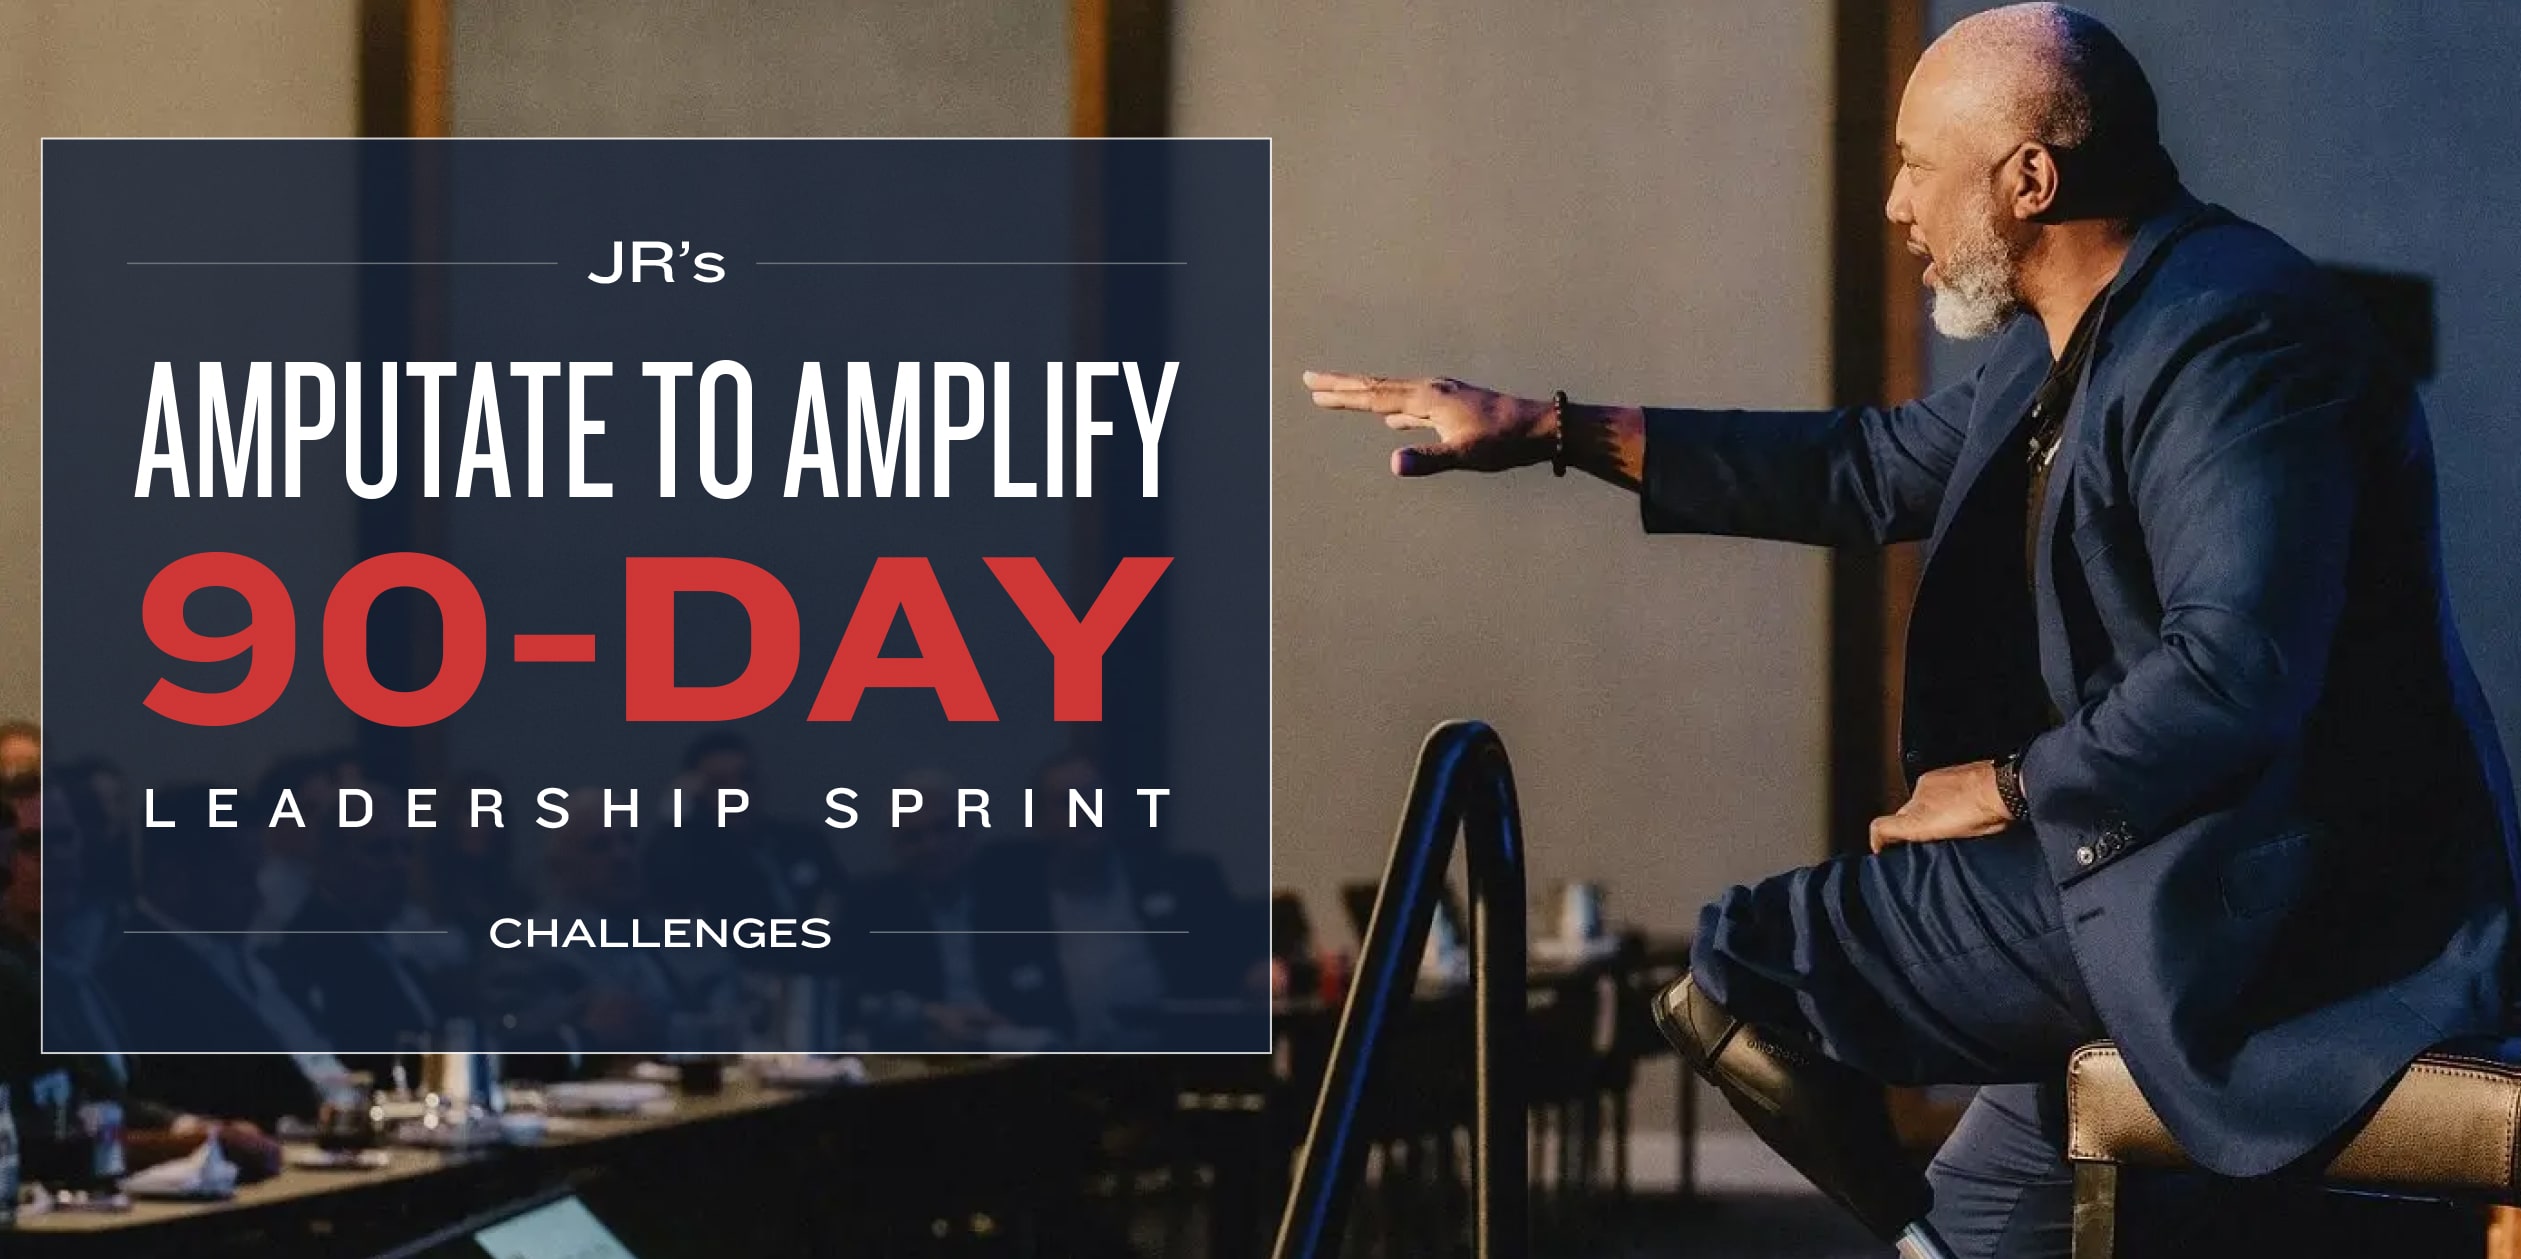 Amputate to Amplify Leadership Sprint Challenges, Designed in 90-Day Sprints, with John Register